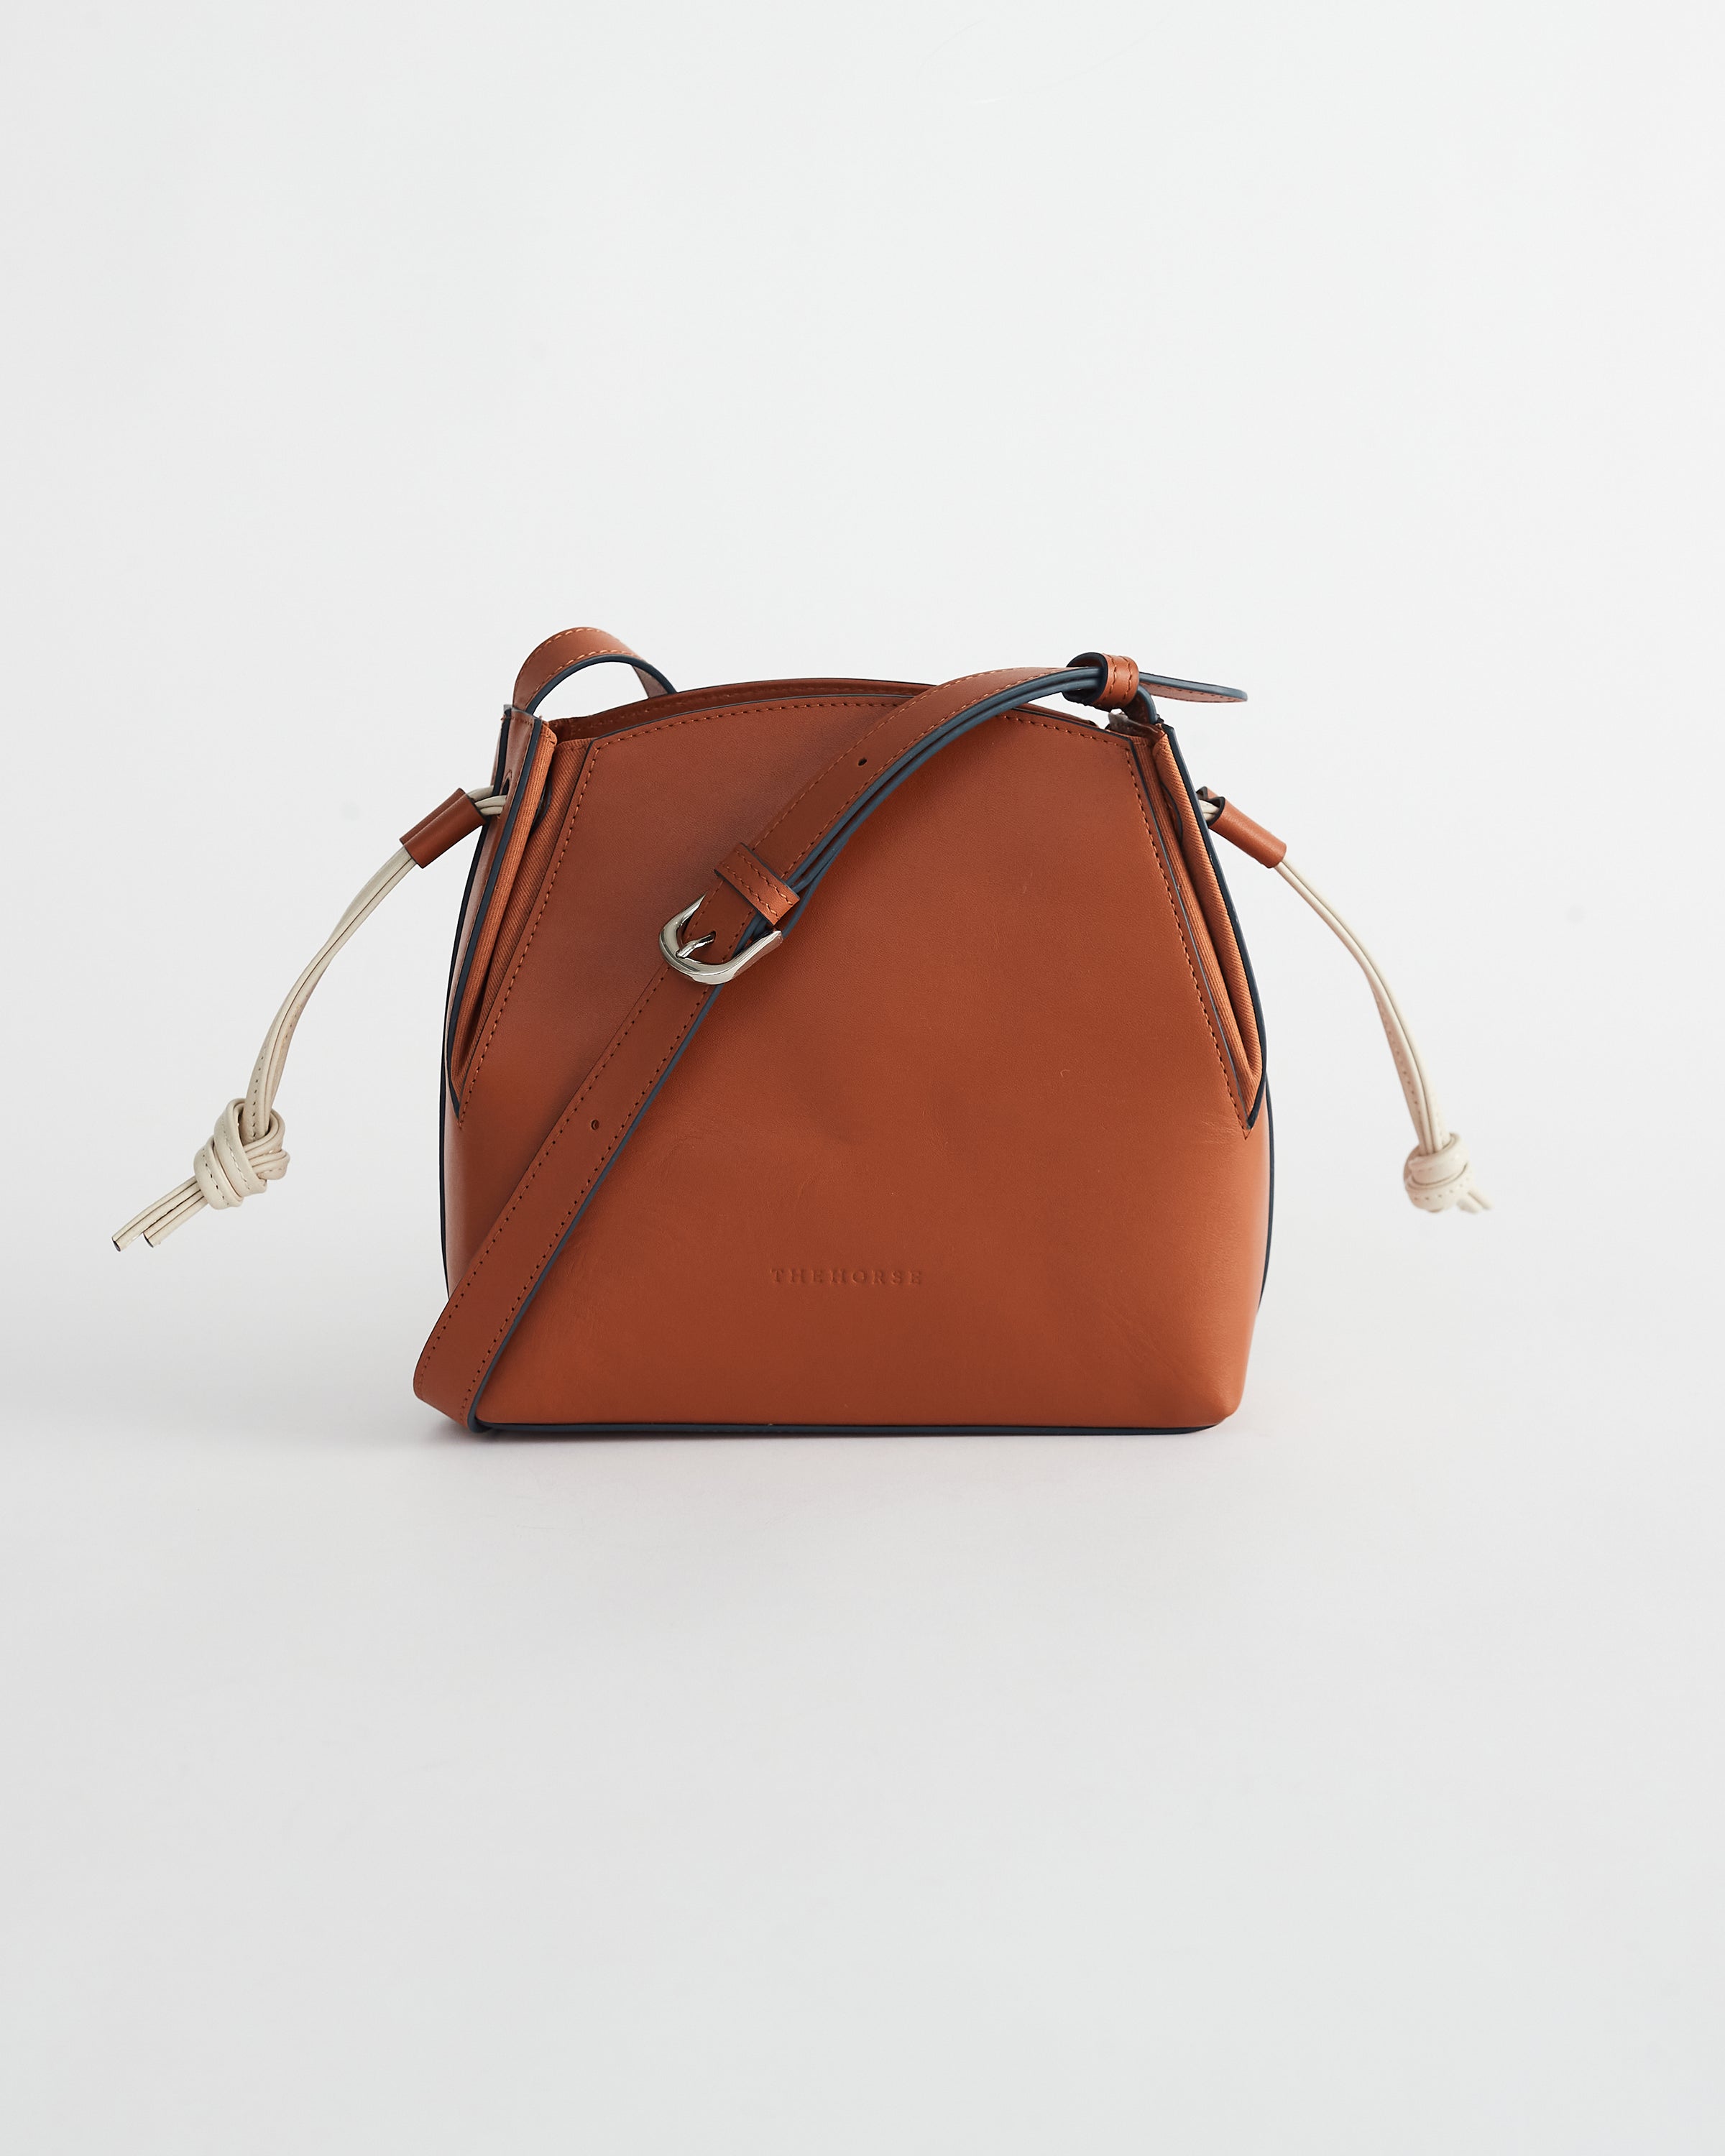 The Juno Leather Crossbody Shoulder Bag in Tan by The Horse®